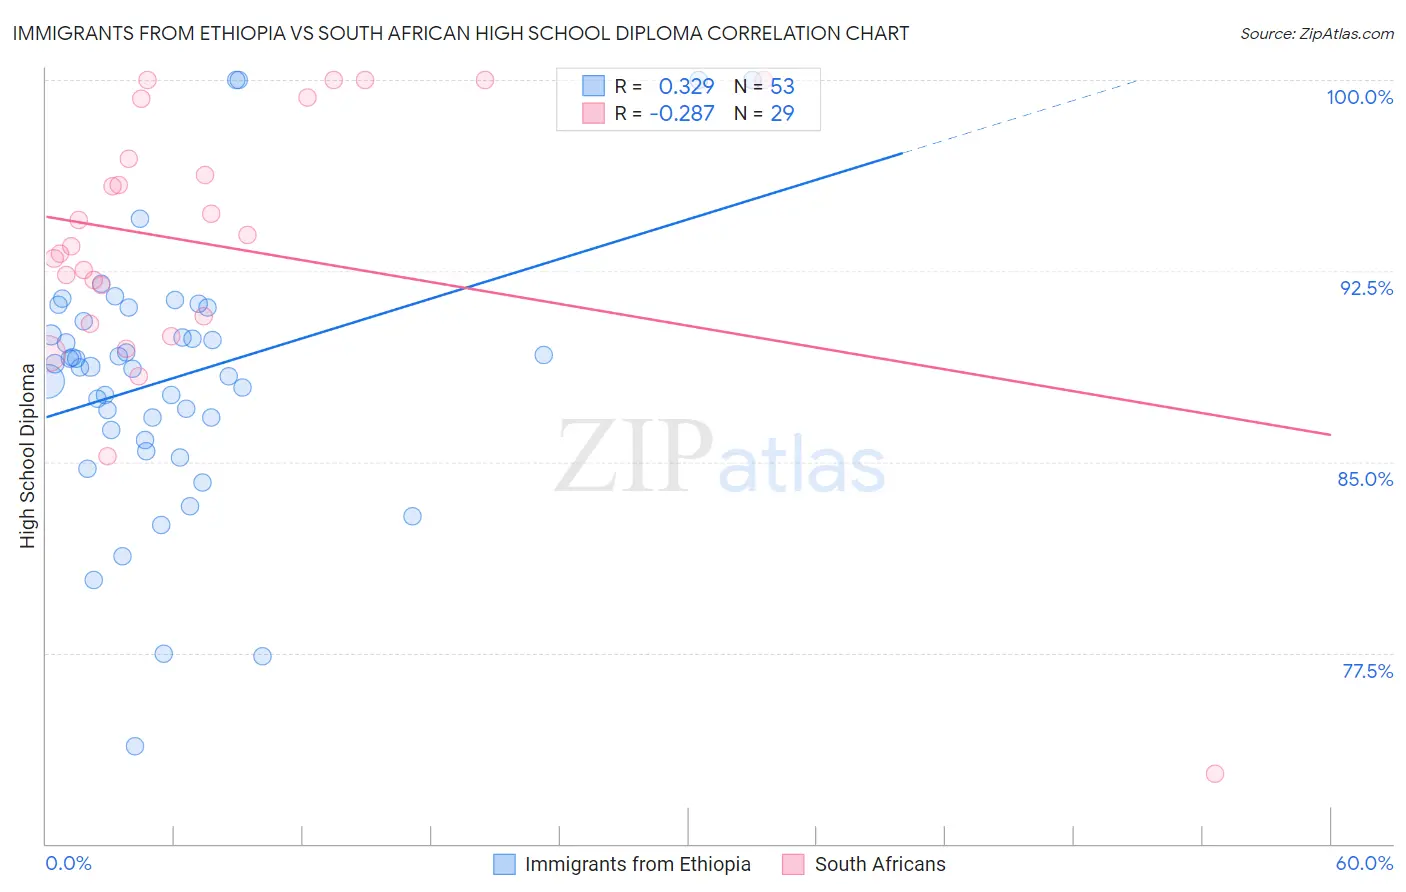 Immigrants from Ethiopia vs South African High School Diploma